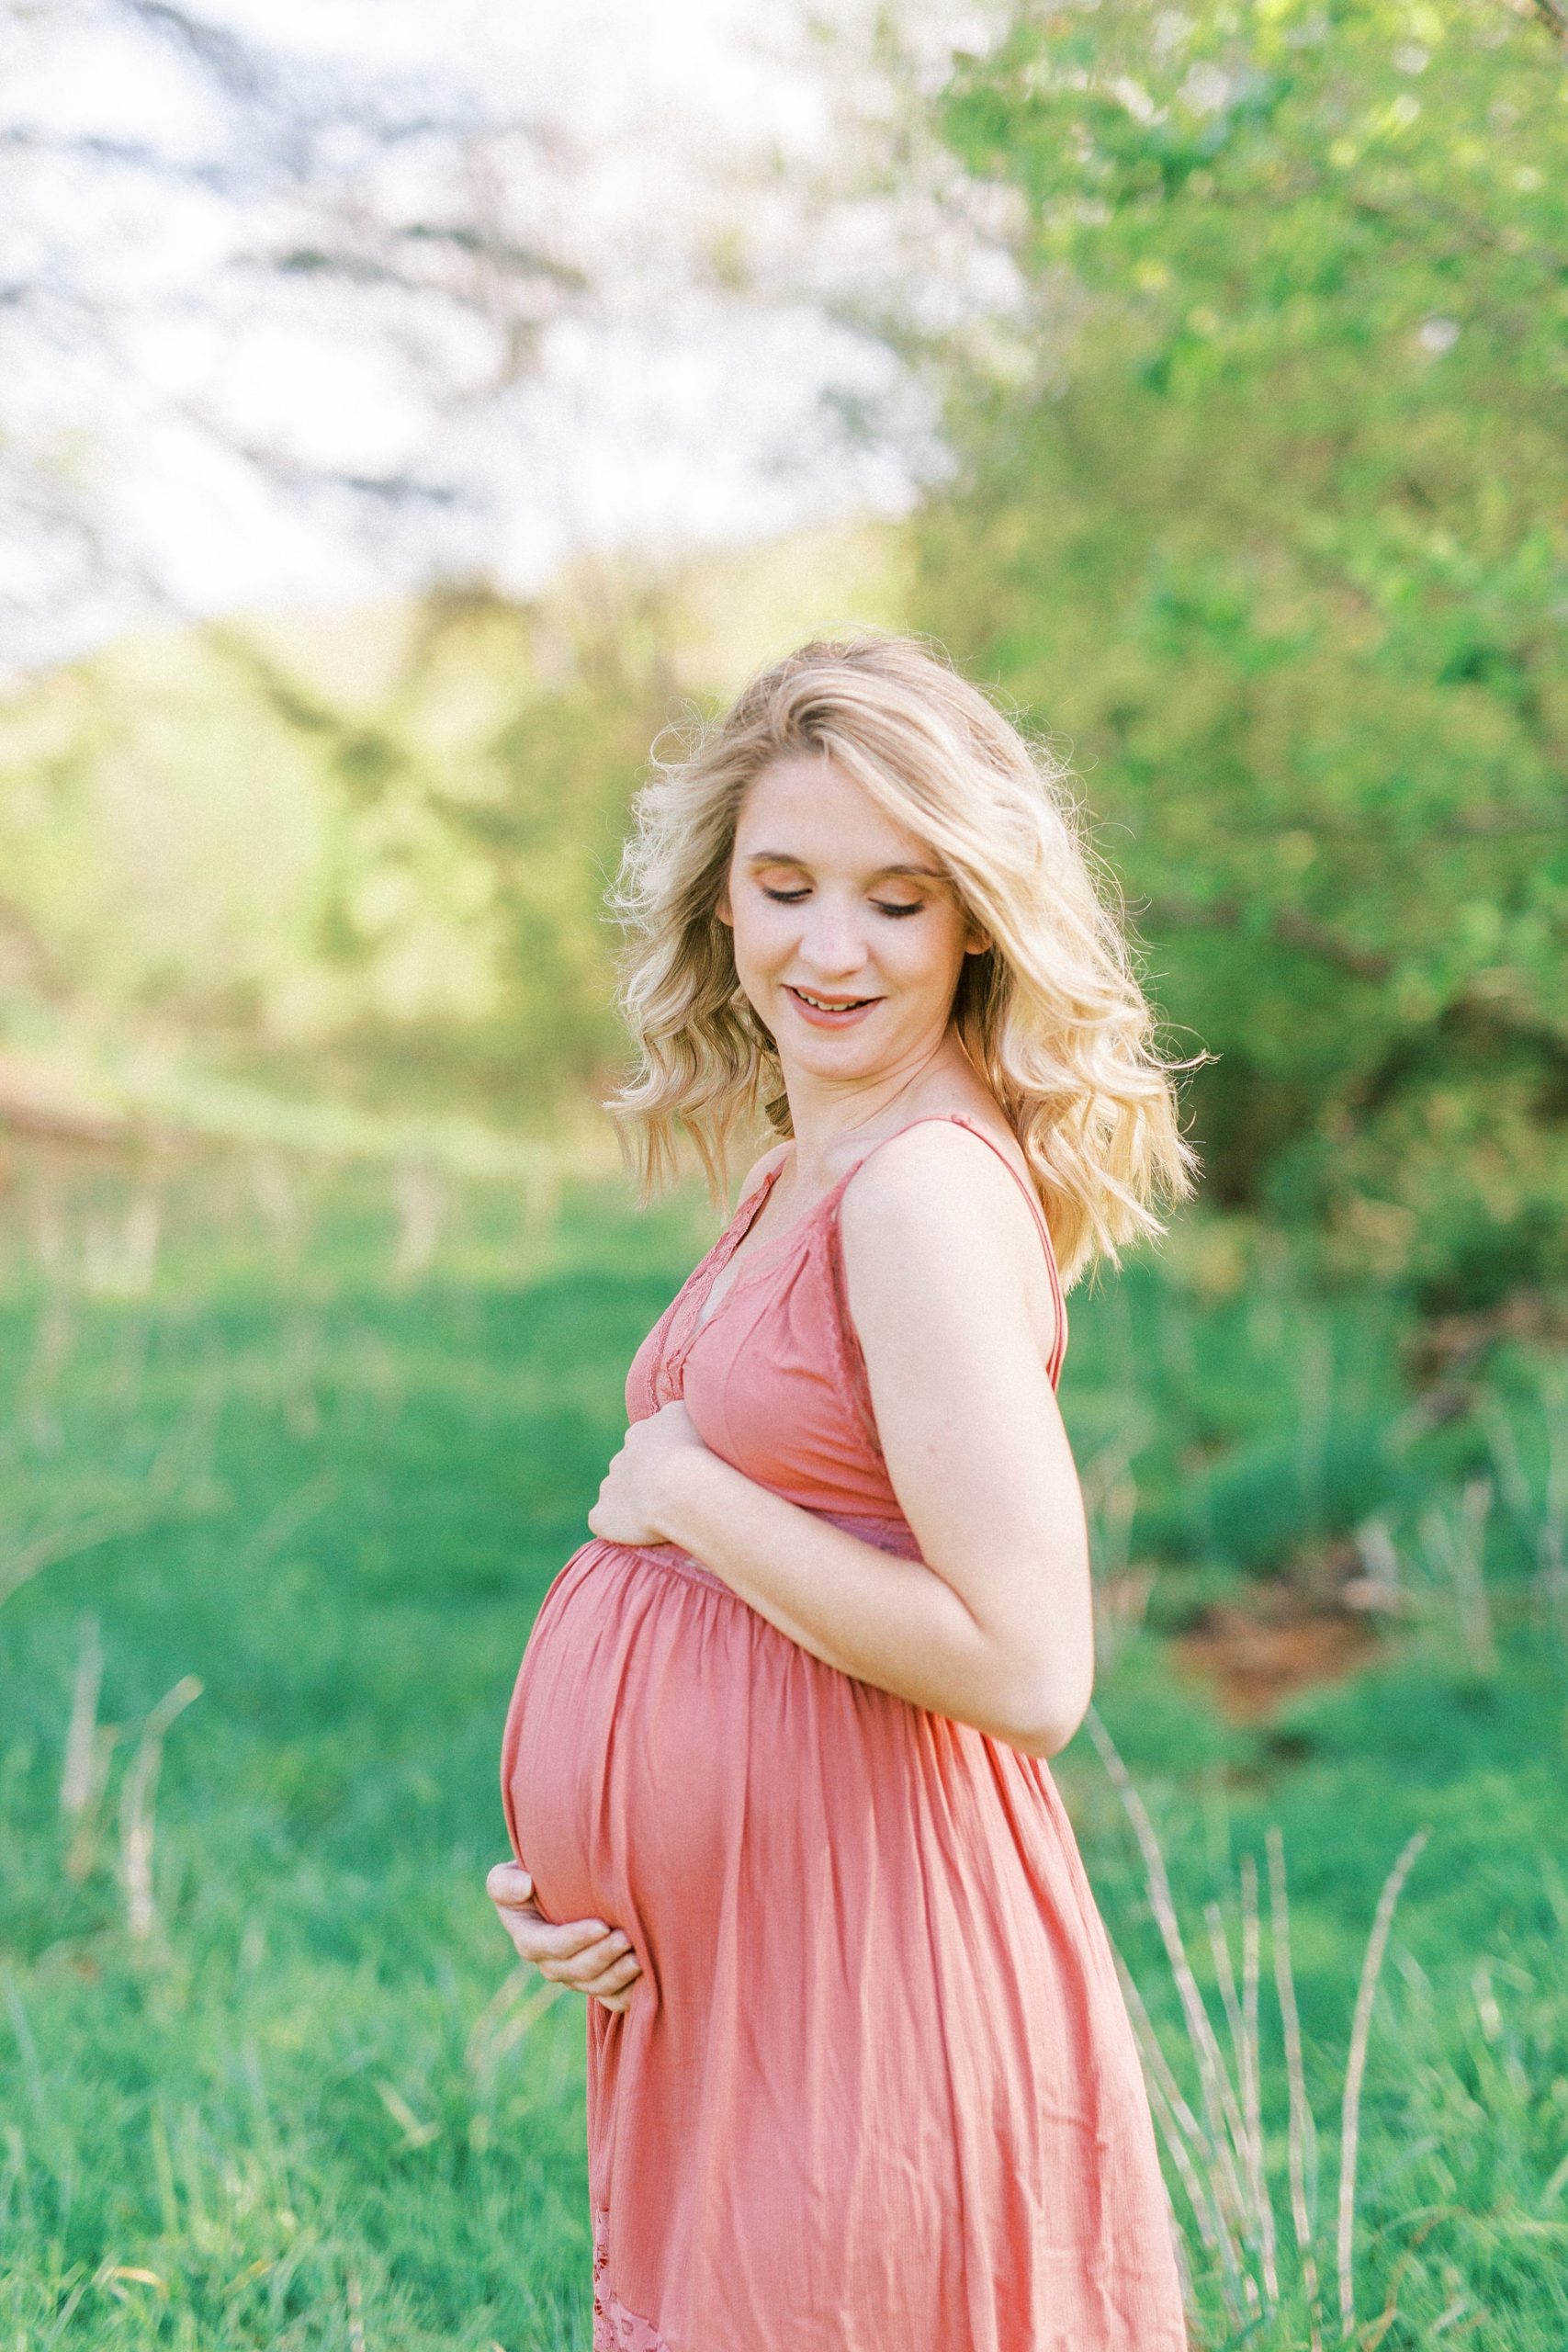 expecting mother looks over should during Winston-Salem maternity photos